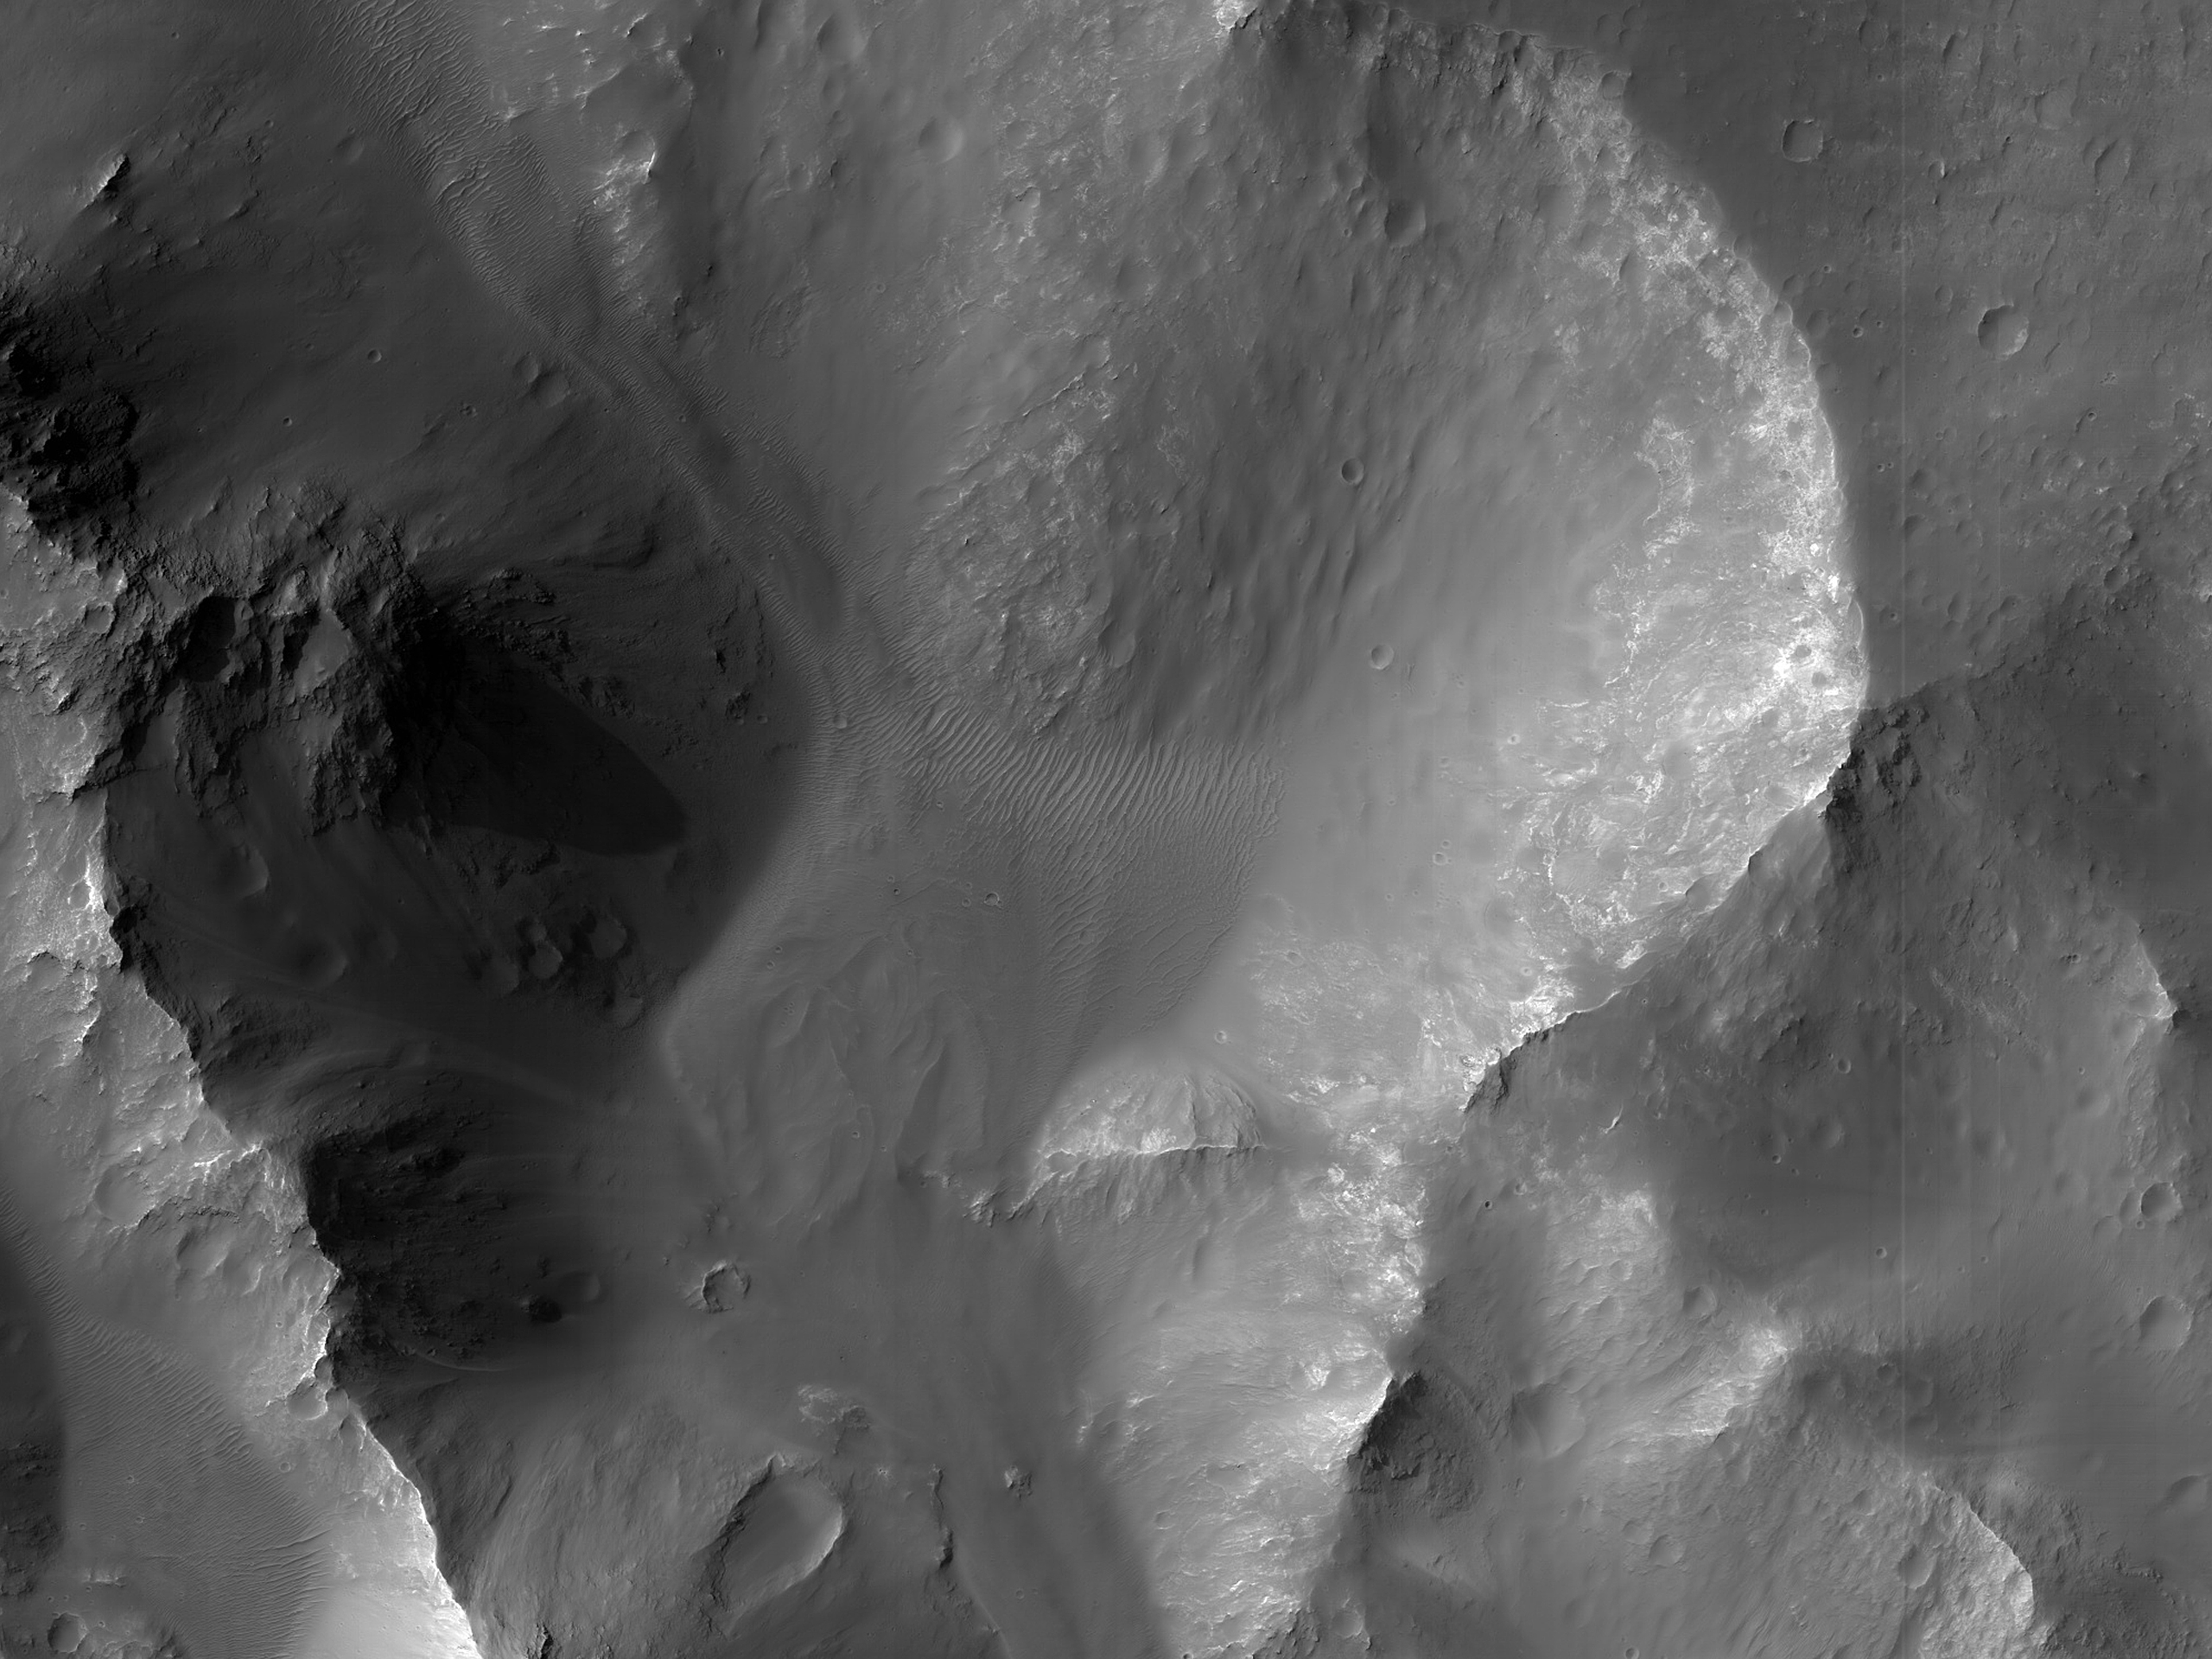 Holden Crater Rim West of the MSL Rover Landing Site